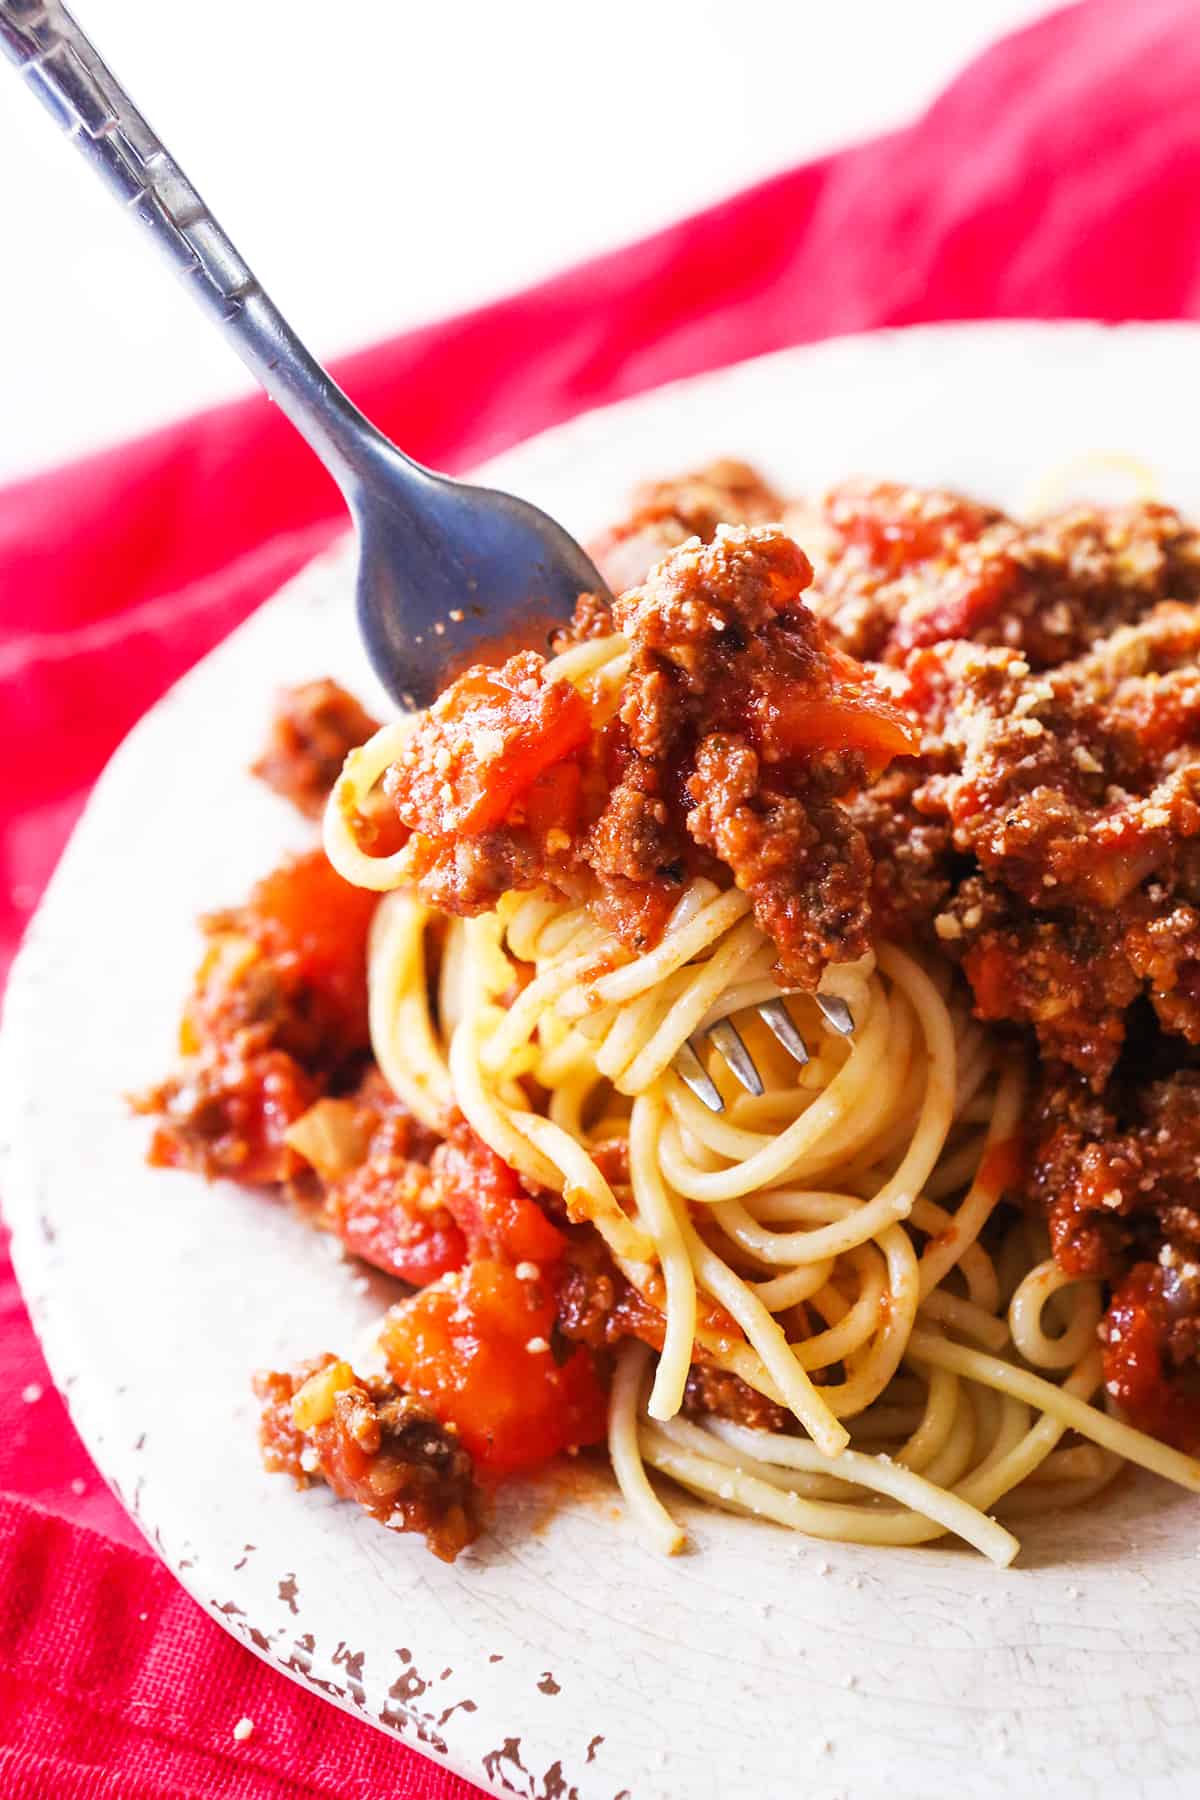 A fork twirling spaghetti and a meaty sauce.